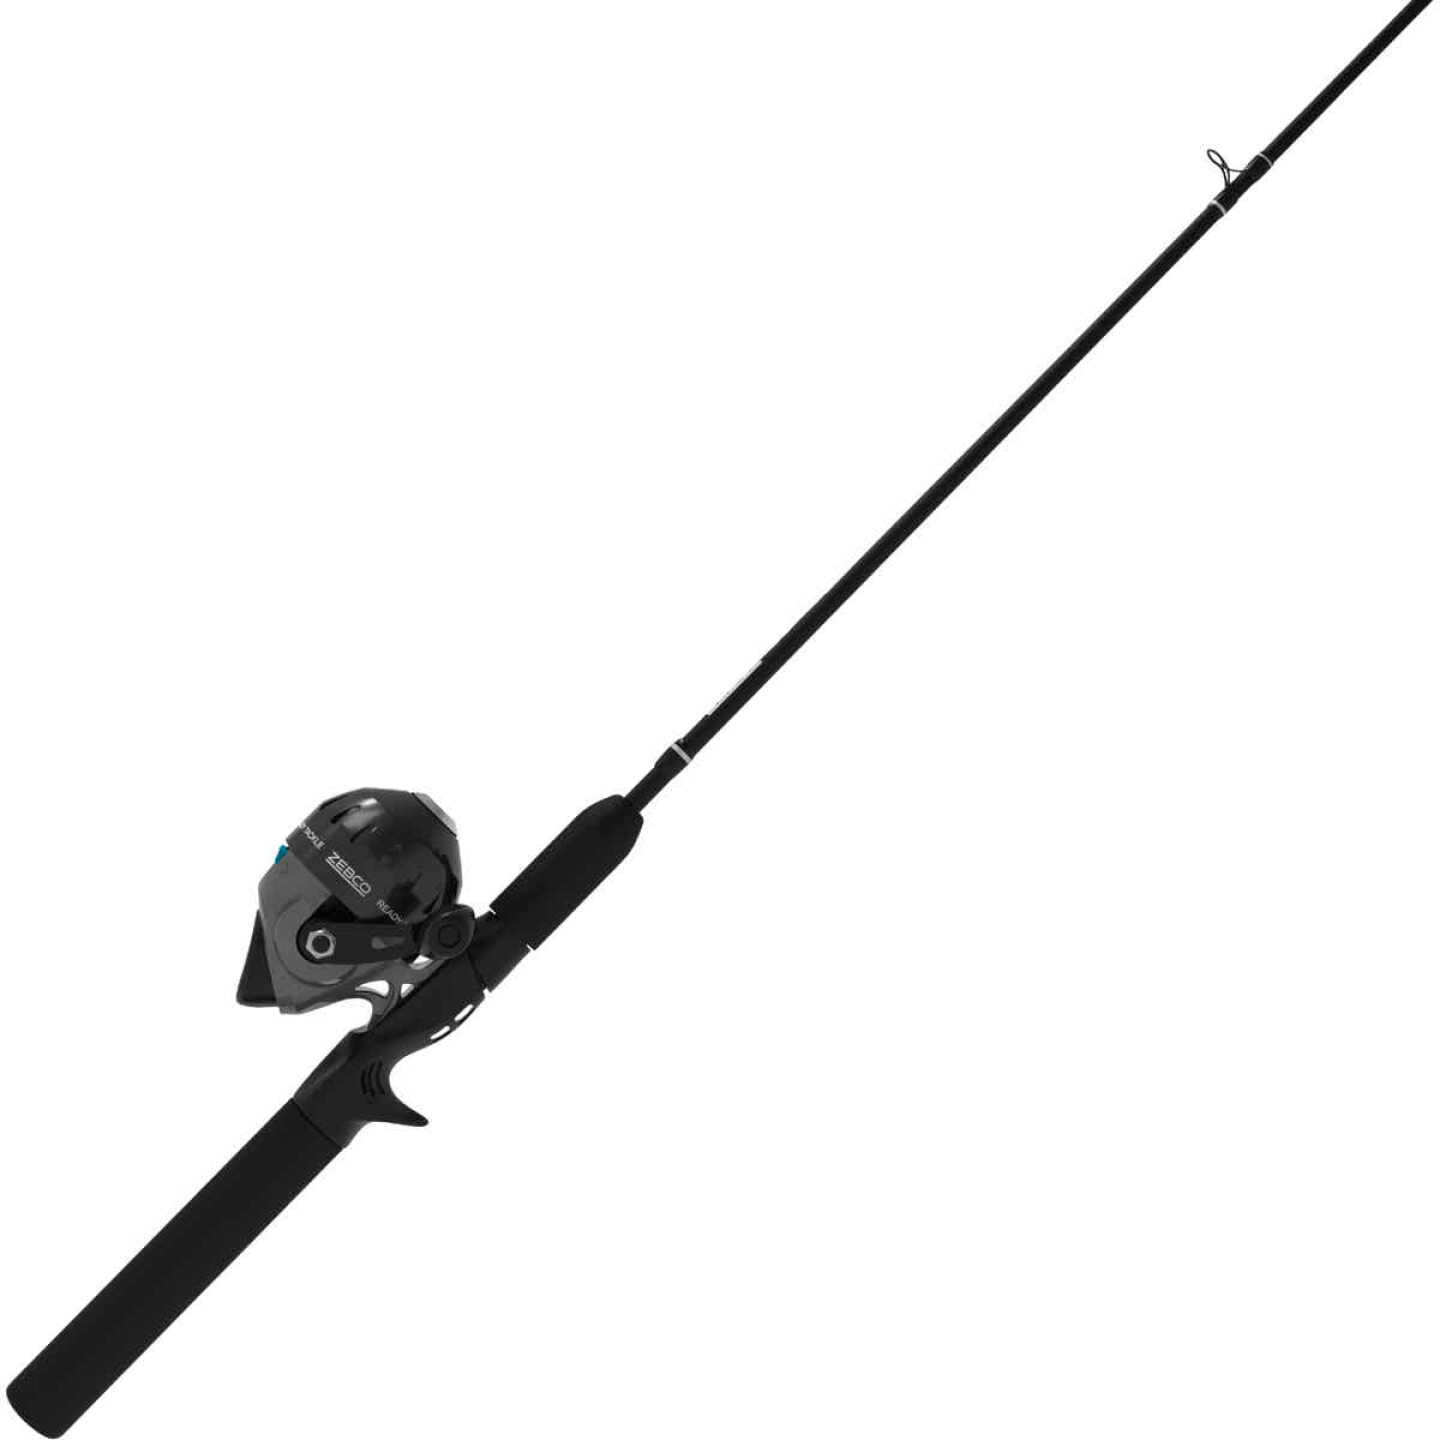 Big Cat Spincast Reel and Fishing Rod Combo, All-Metal Gears